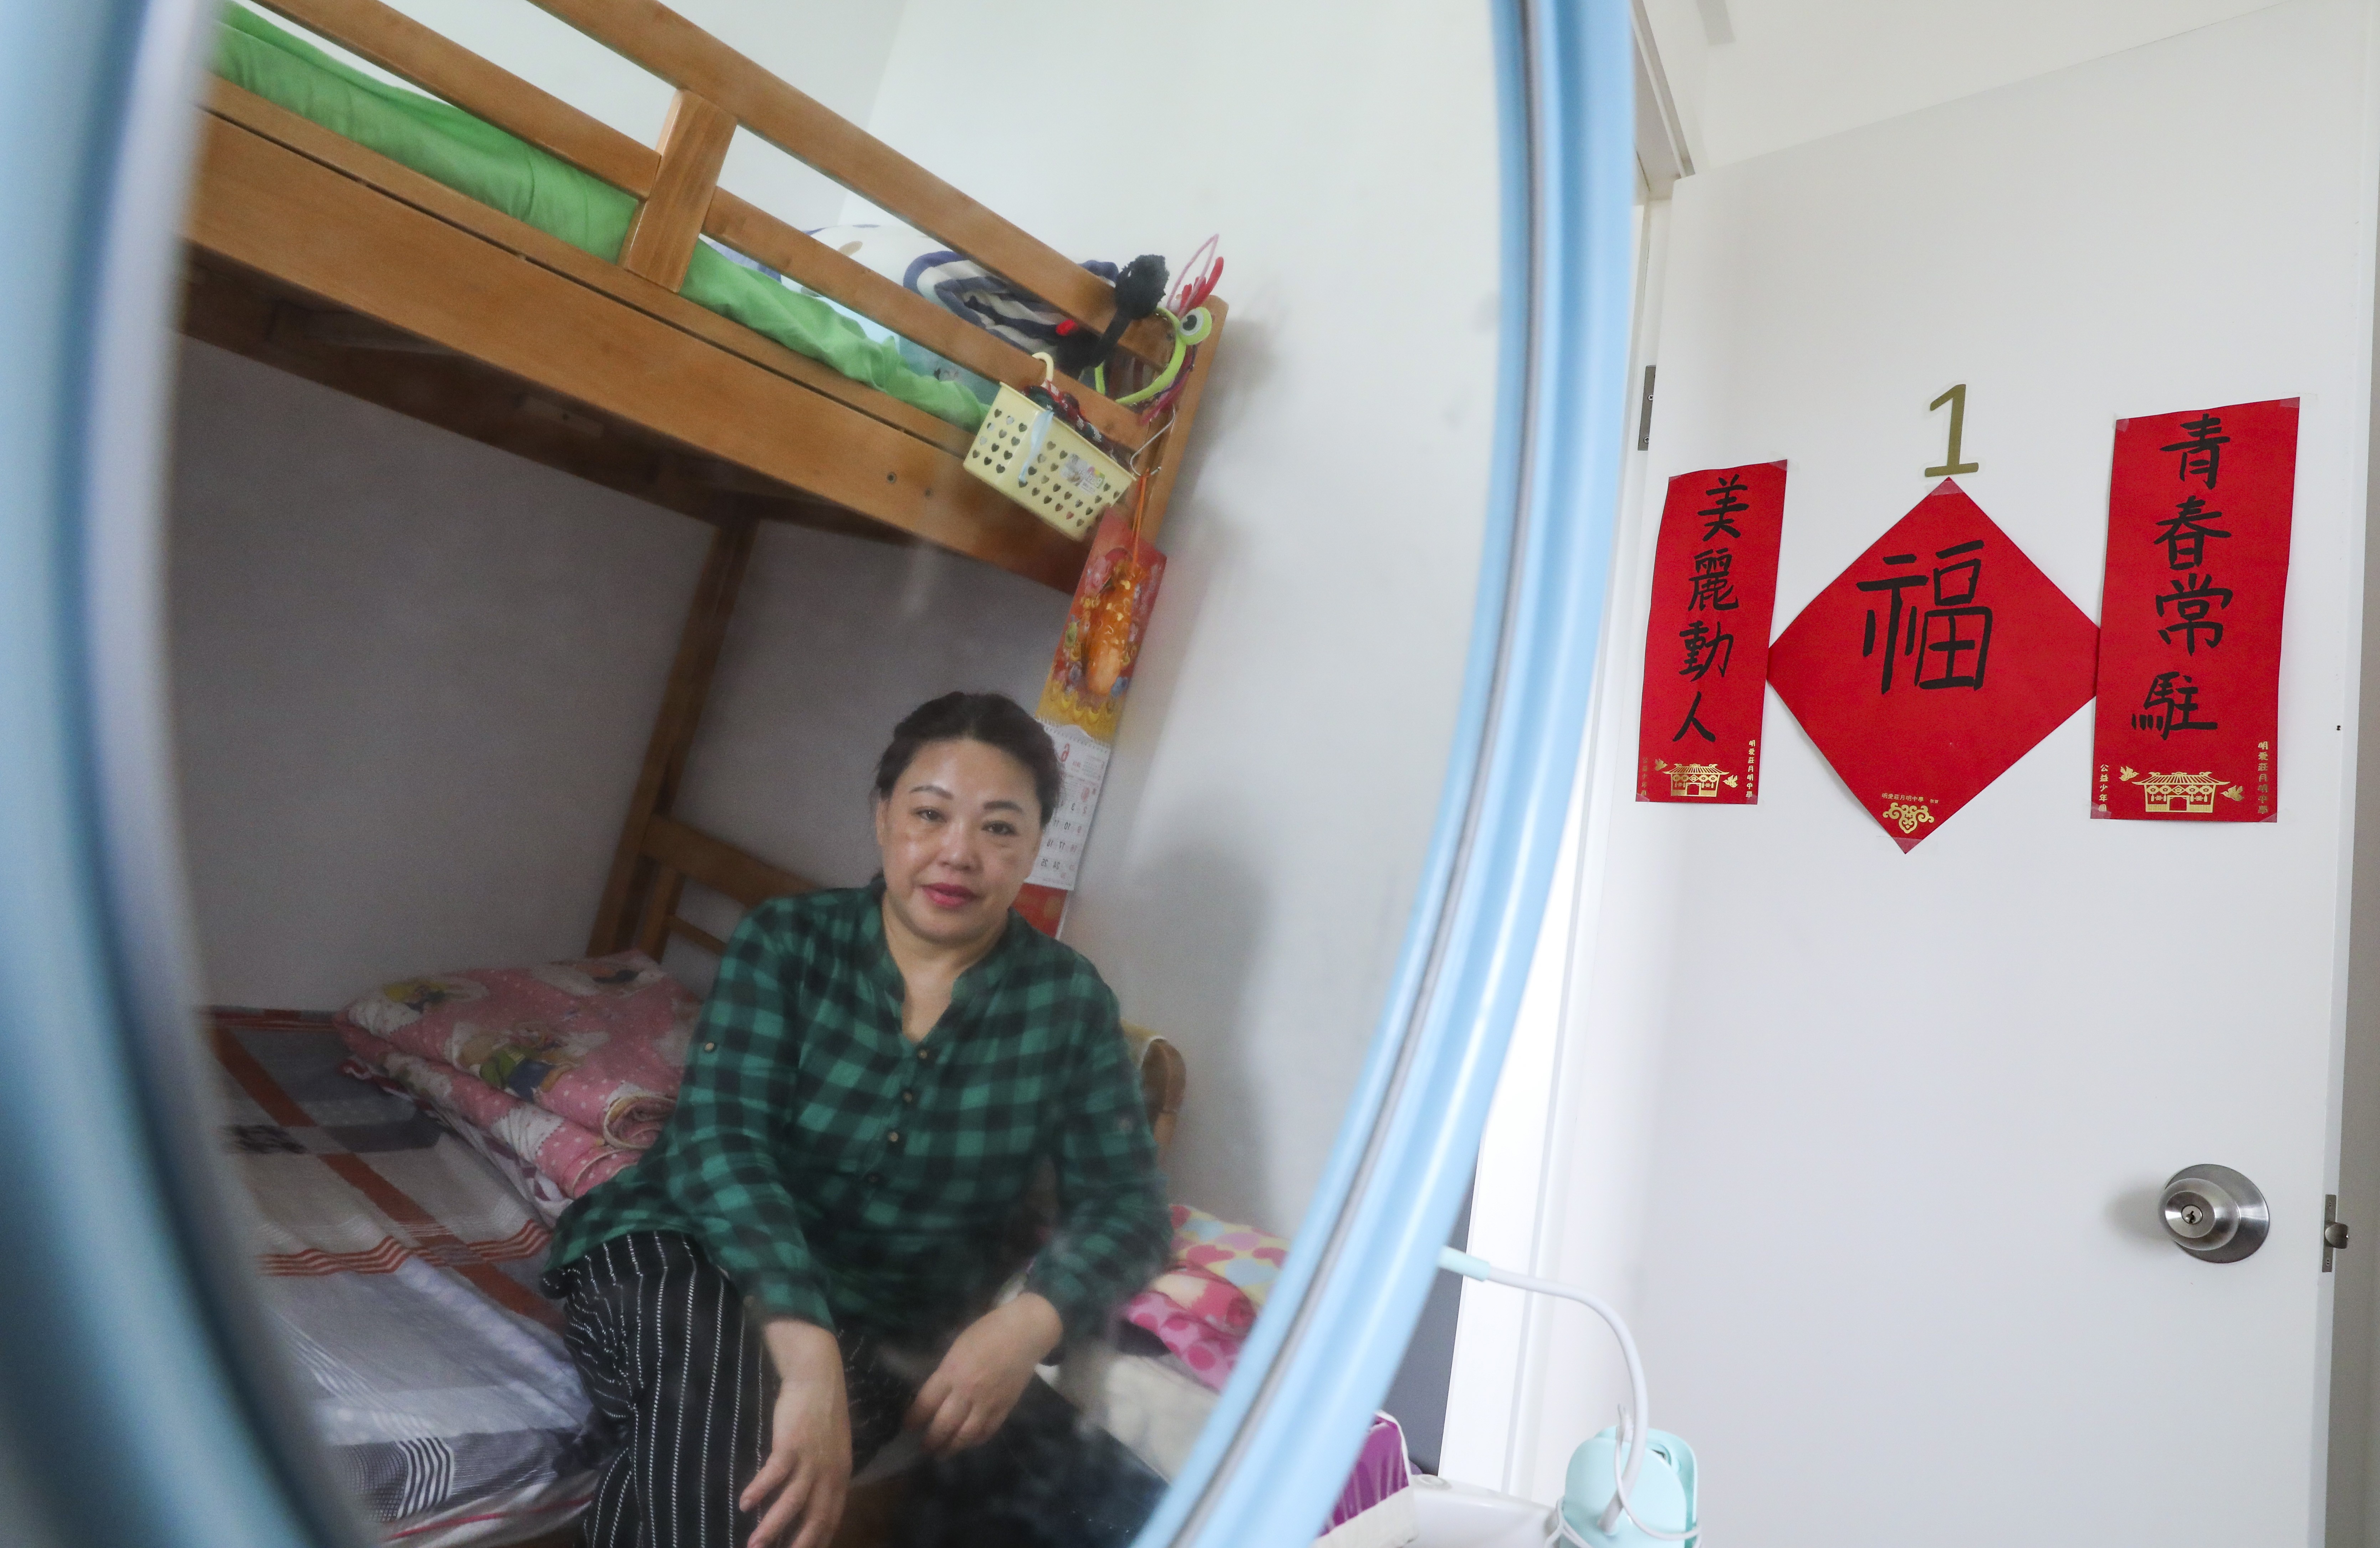 Wu Xiaoping, 51, a single mother who lives with her 18-year-old daughter in community housing. Photo: Nora Tam